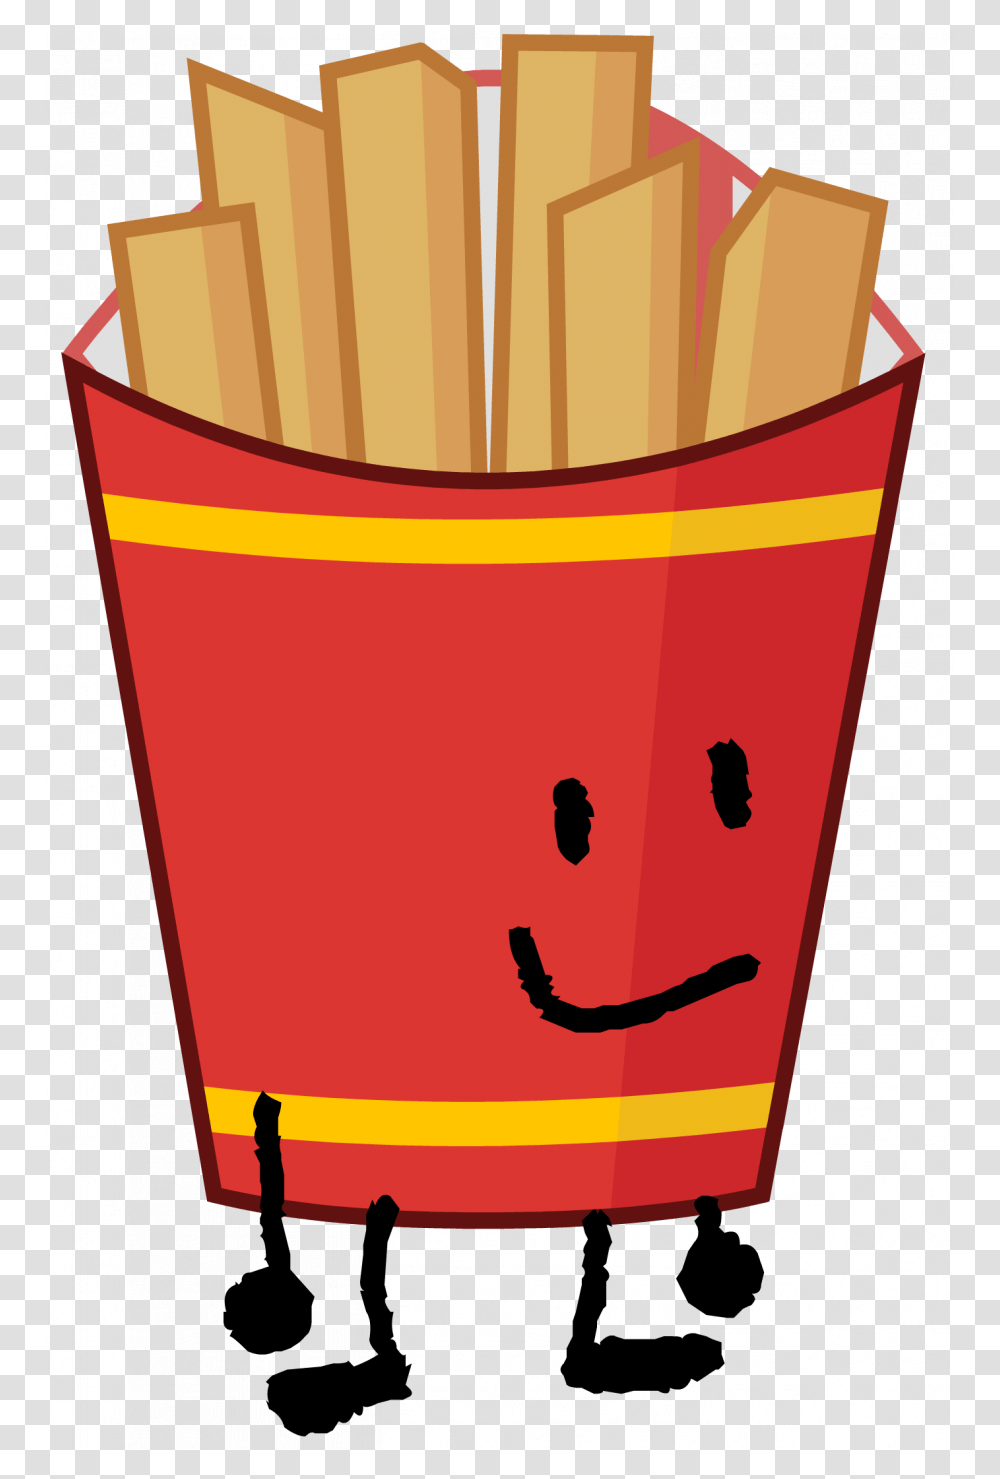 Fries And Burger Drawing Drink Curly Chibi Free Books Battle For Dream Island Fries, Food, Person, Human, Box Transparent Png